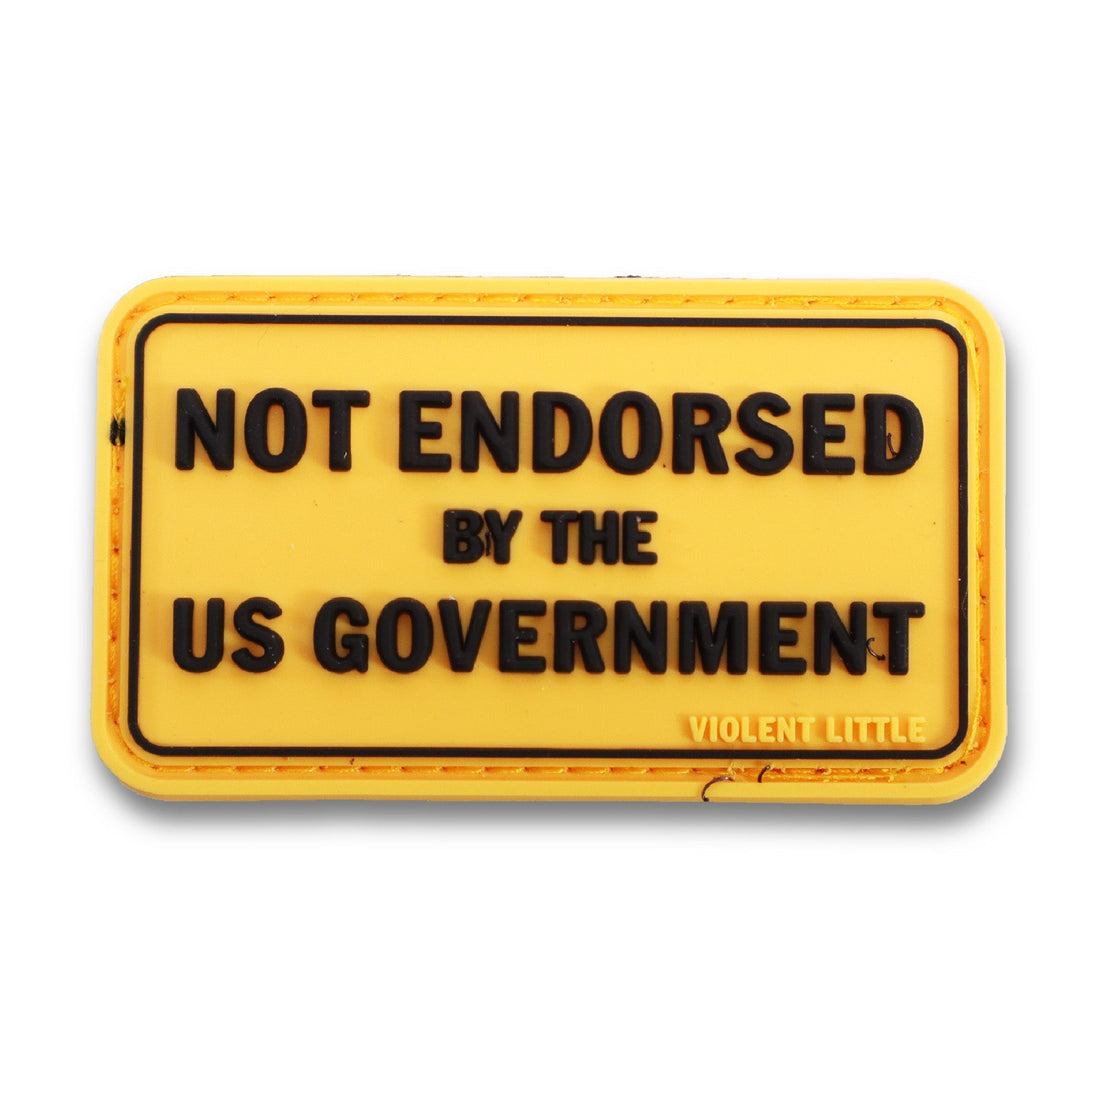 Supplies - Identification - Morale Patches - Violent Little "Not Endorsed By The US Government" PVC Morale Patch